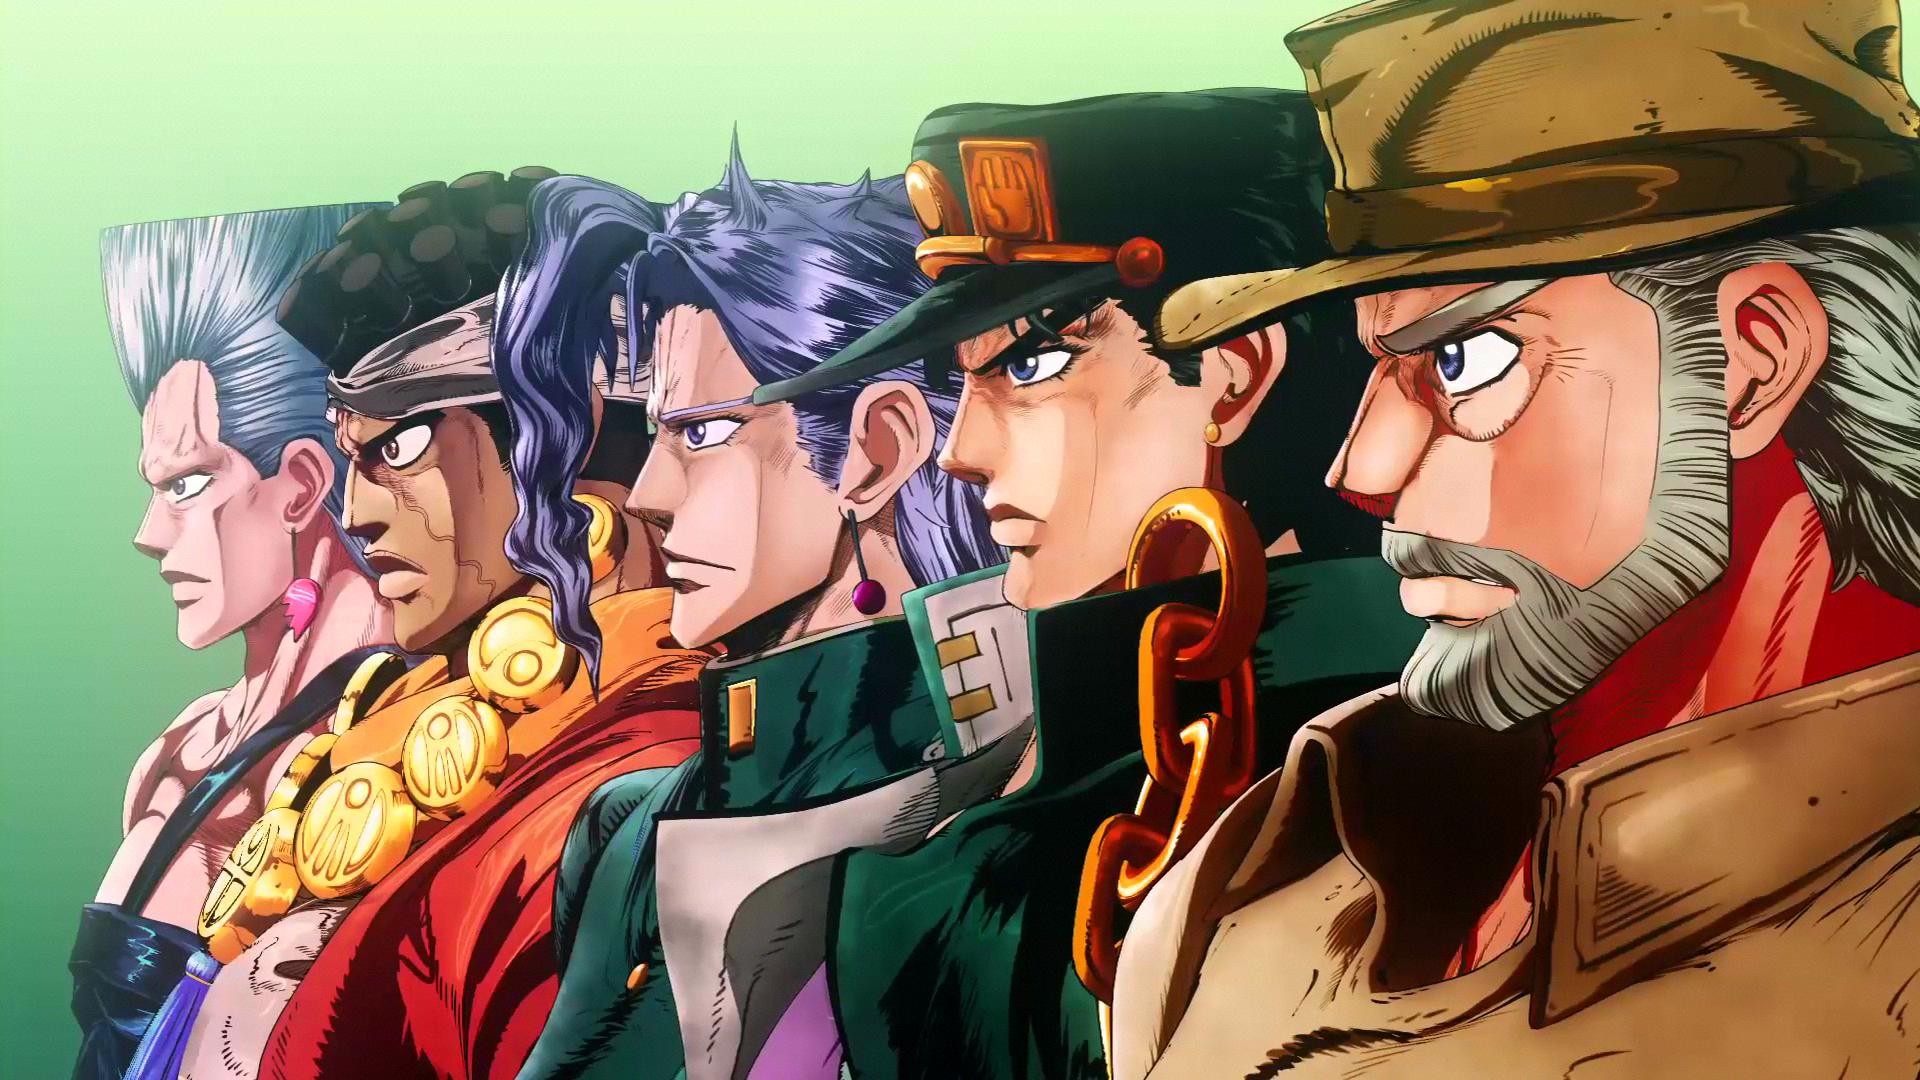 Jojo Bizarre Adventure wallpaper ·① Download free awesome full HD wallpapers for desktop and